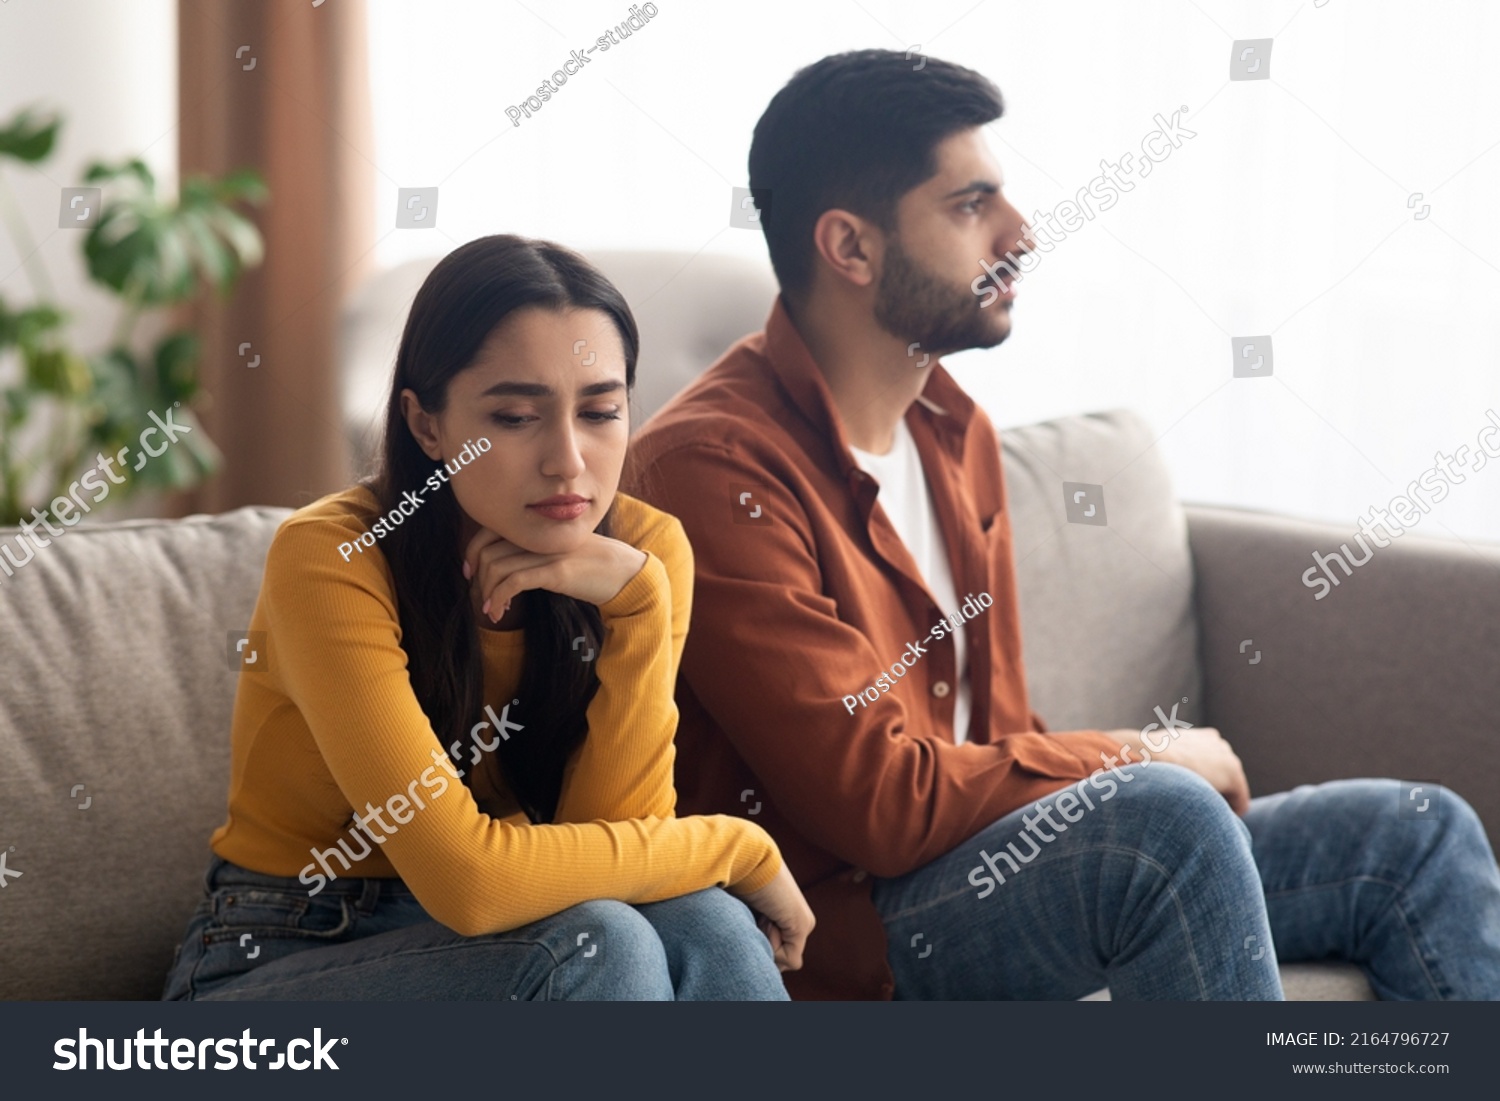 Marital Crisis. Unhappy Arabic Couple Sitting On Couch At Home, Having Relationship Problems. Bad Marriage, Breakup Concept. Selective Focus On Frustrated Woman #2164796727